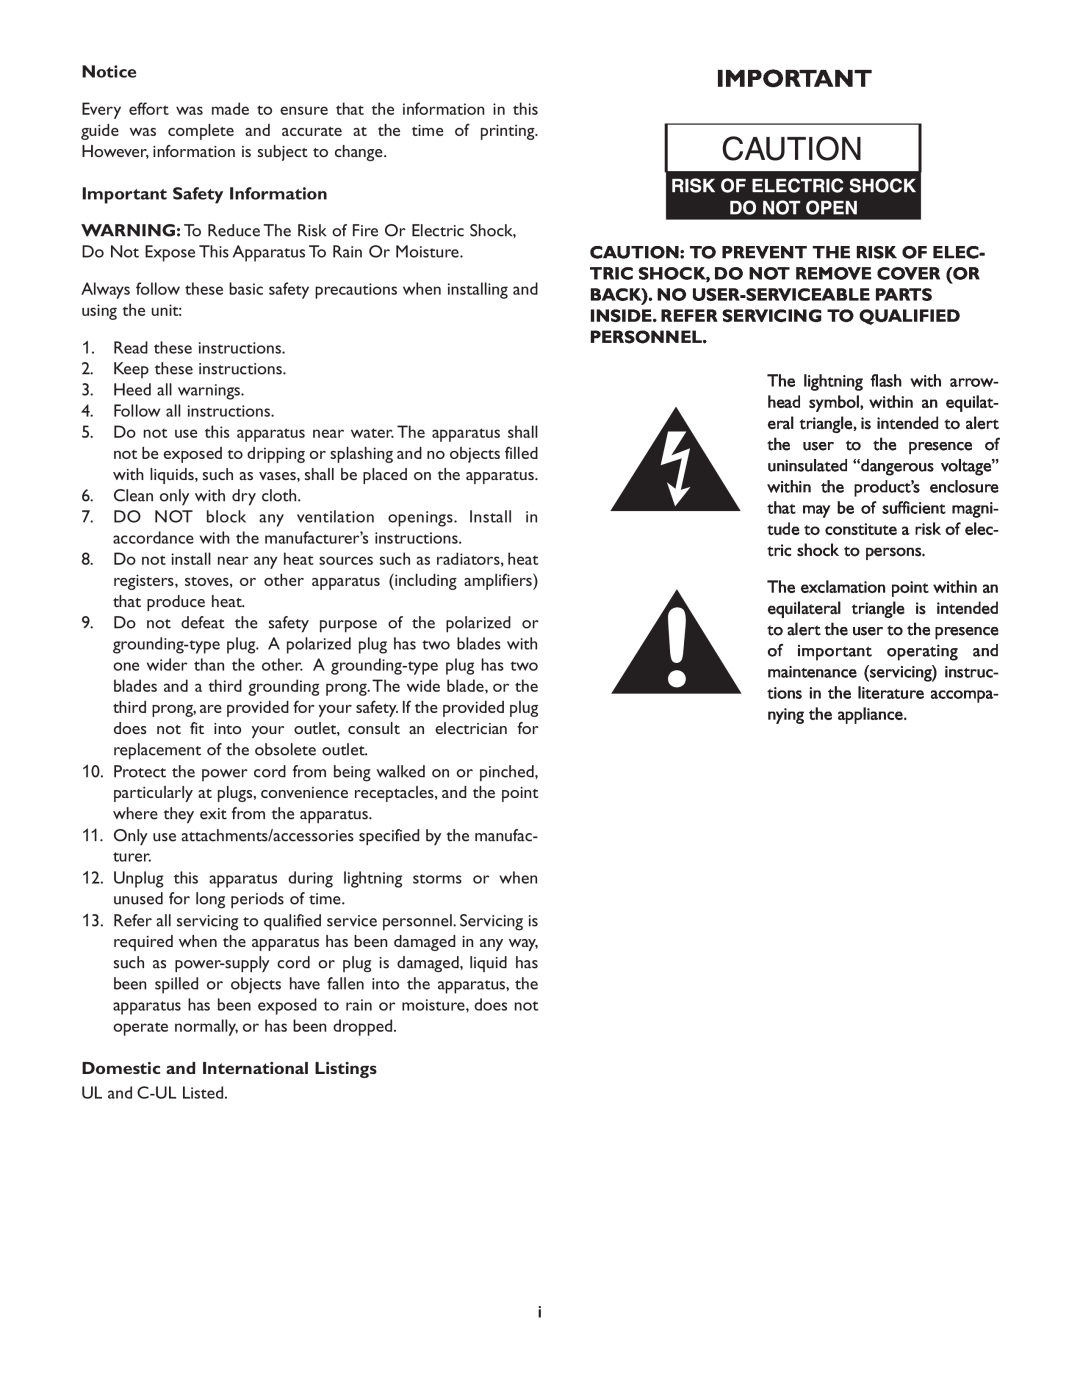 Bogen & X600 manual Important Safety Information, Domestic and International Listings 